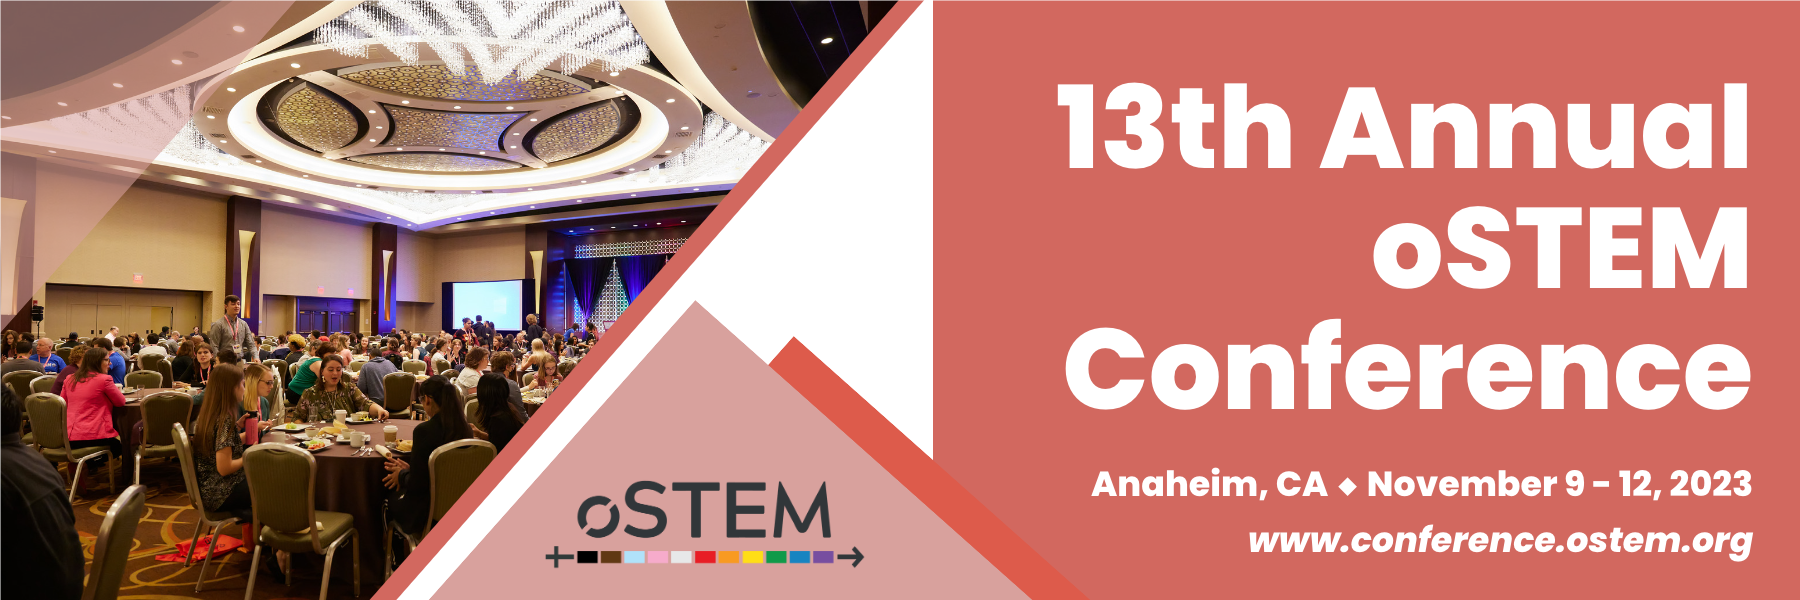 13th Annual oSTEM Conference